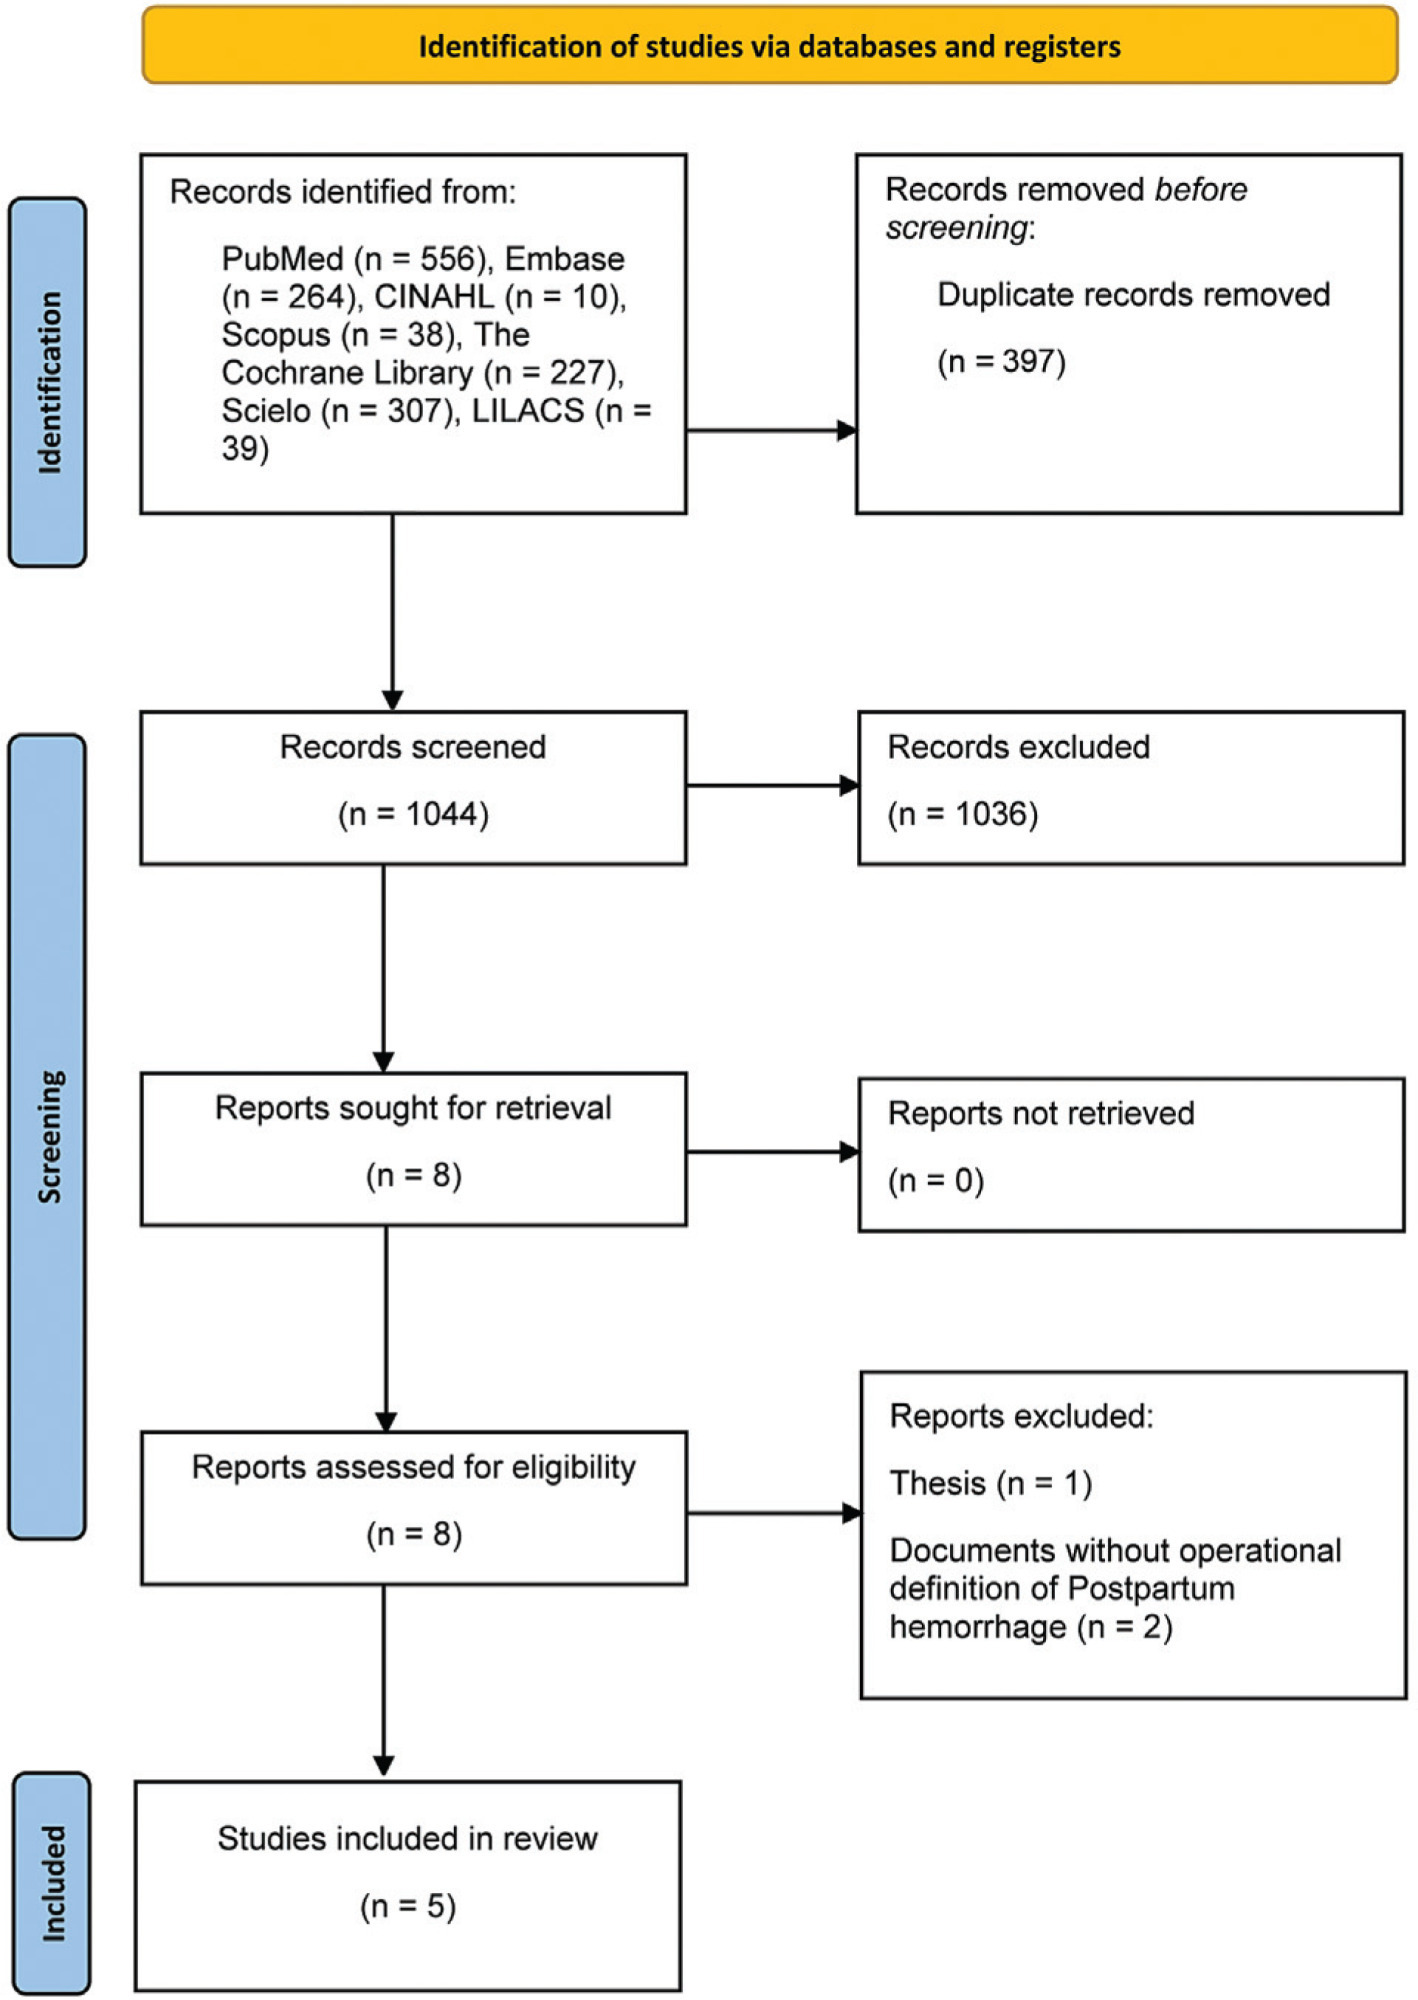 Fetal Macrosomia and Postpartum Hemorrhage in Latin American and Caribbean Region: Systematic Review and Meta-analysis